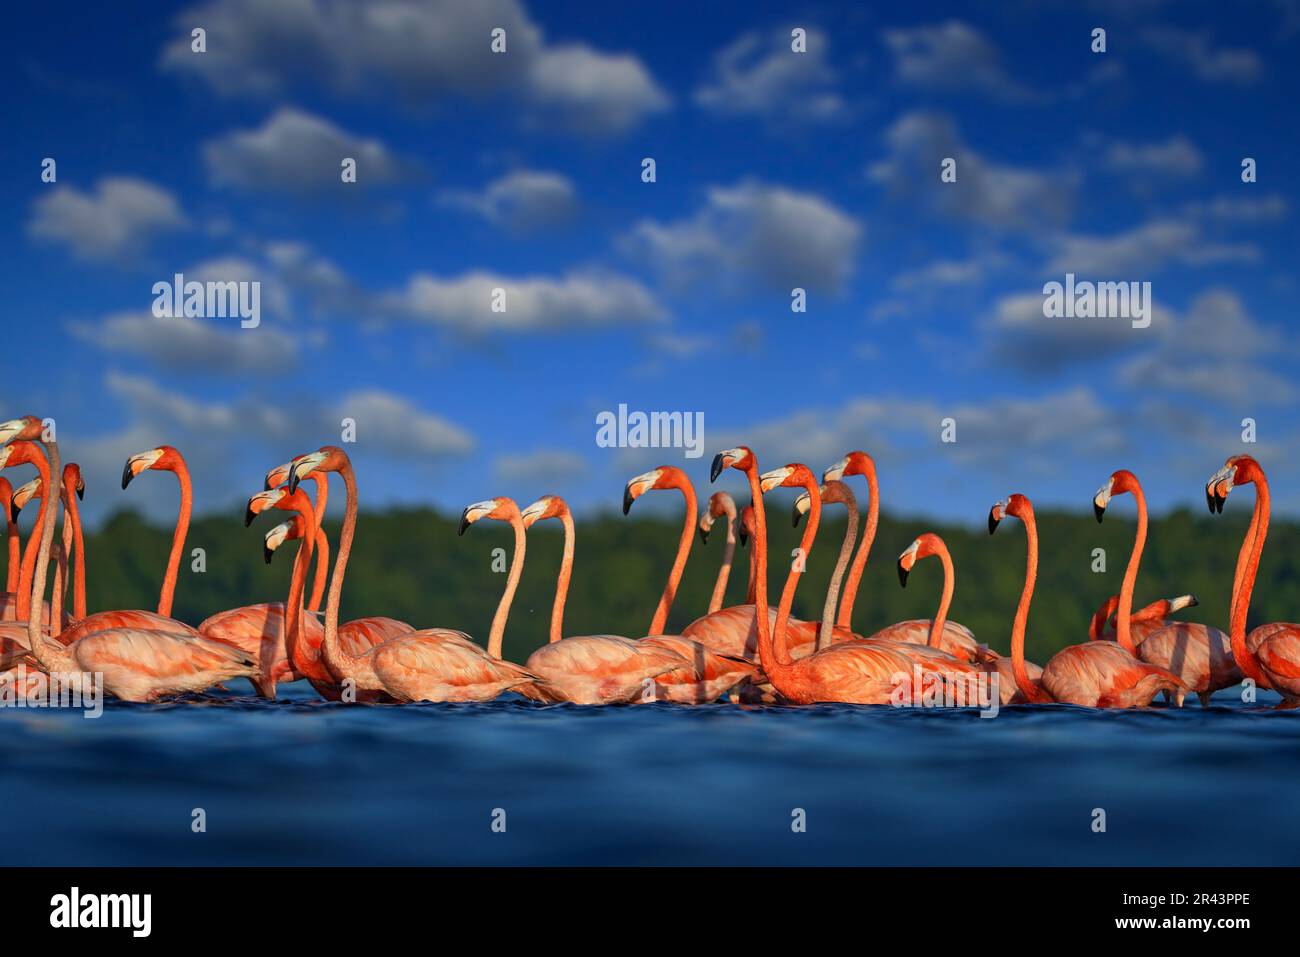 Flock of bird in the river sea water, with dark blue sky with clouds. Flamingos, Mexico wildlife. American flamingo, Phoenicopterus ruber, pink red bi Stock Photo